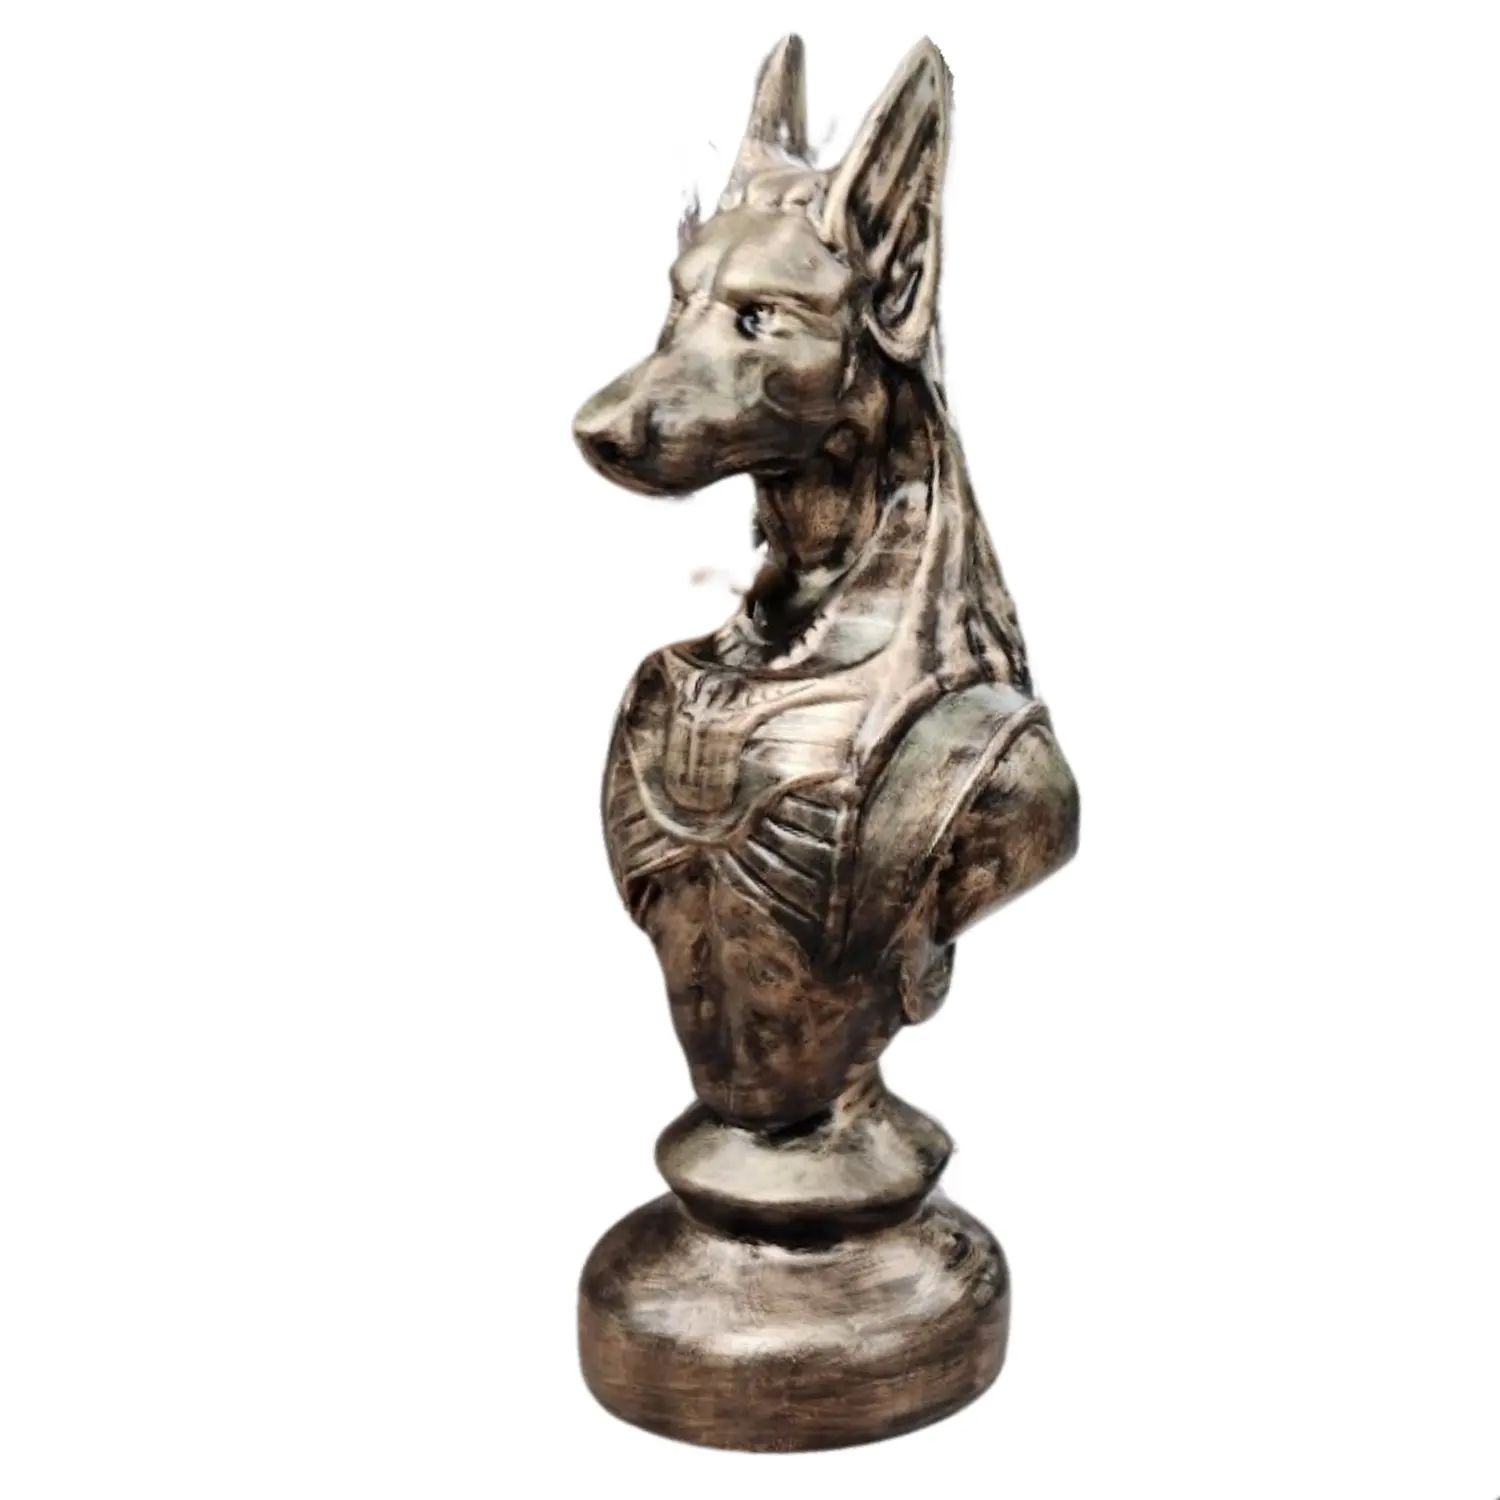 Gifts And Crafts Resin Craft Large Resin Statue Decoration Anubis Egyptian Sculpture Bronze Paint Custom Design And Color